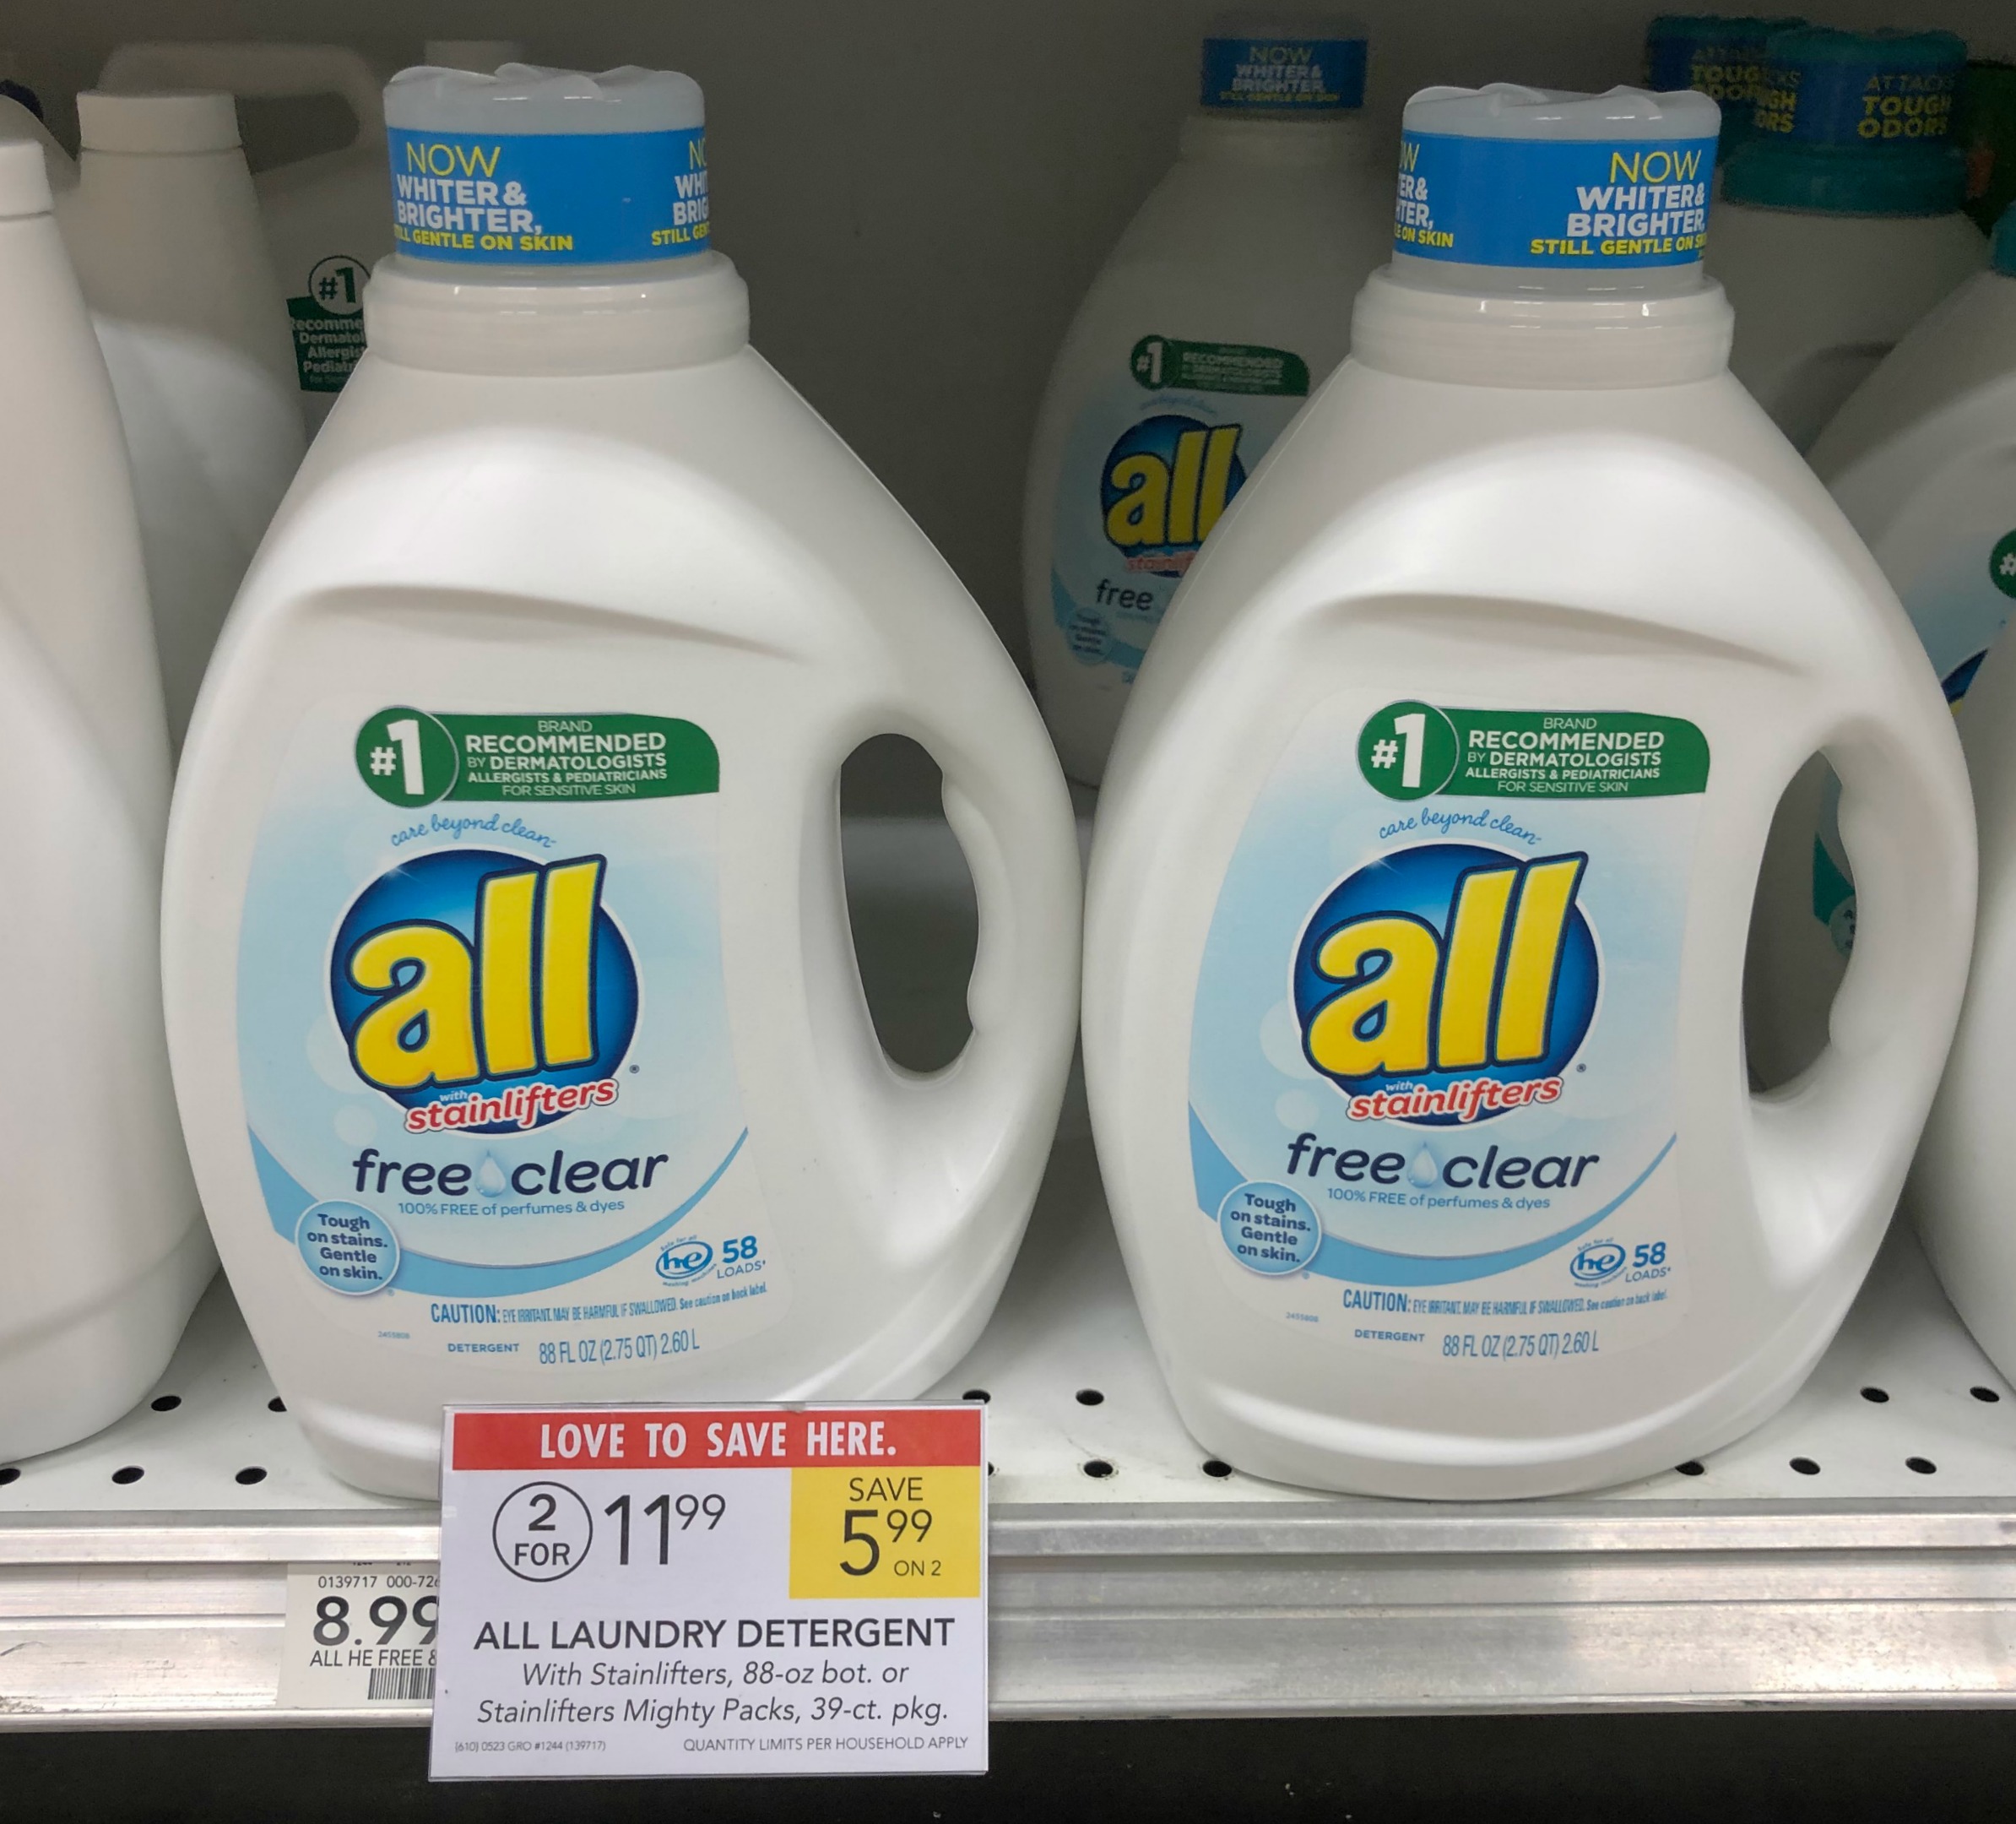 Big Bottles Of All Laundry Detergent Just $1.99 At Publix (Approximately 4¢ Per Load) on I Heart Publix